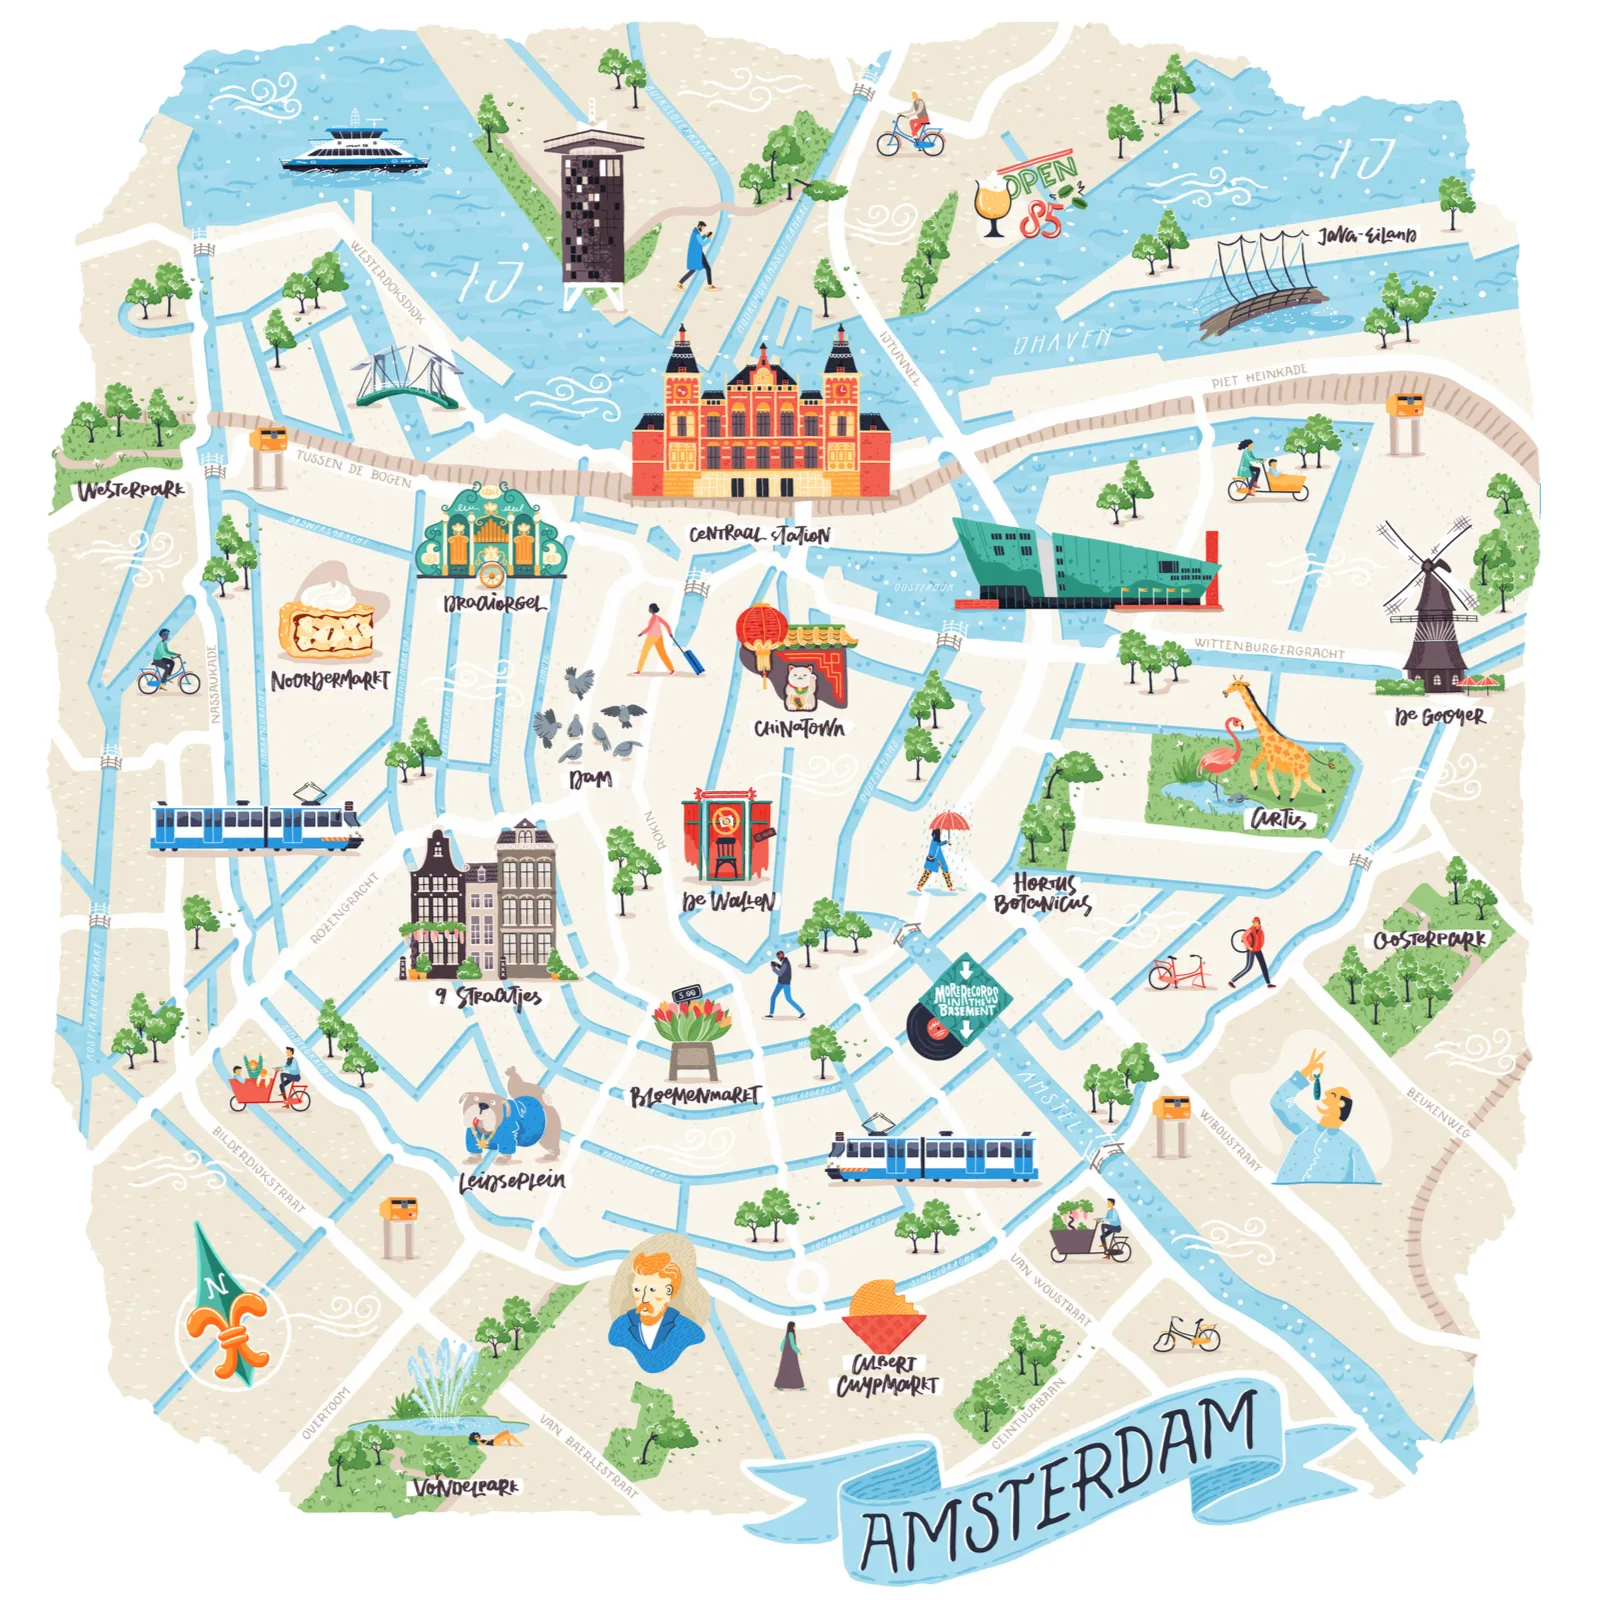 Amsterdam illustrated map showing the best places to stay in Amsterdam